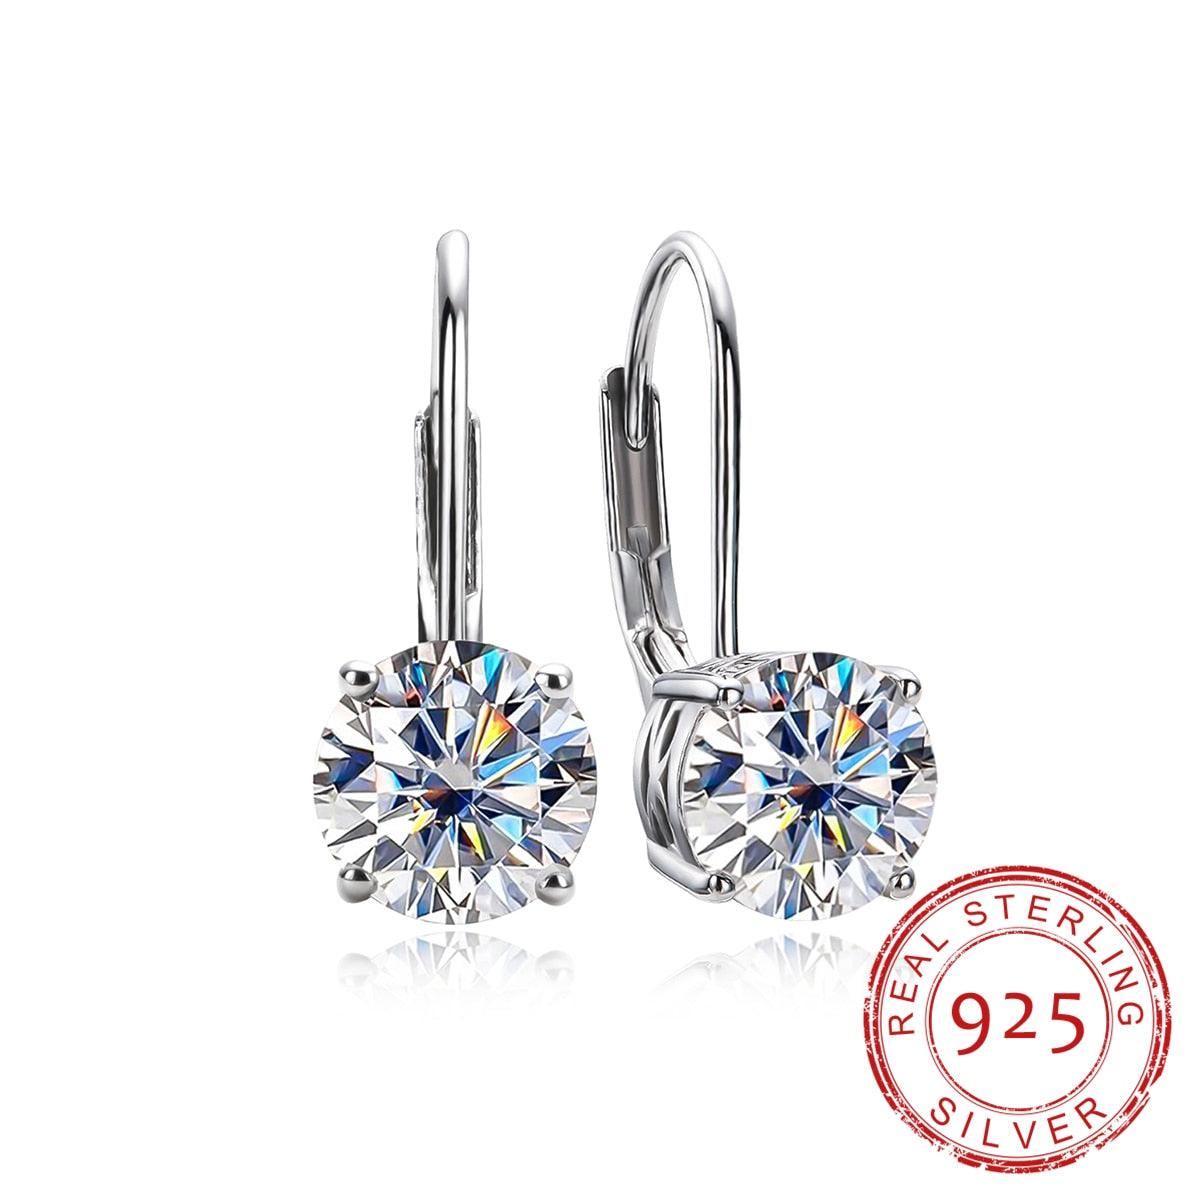 Brilliant 1 Carat D Color ♥︎ High Quality Moissanite Diamonds ♥︎ Bow Cuff Earrings Earrings - Charming Jewellery - The Jewellery Supermarket